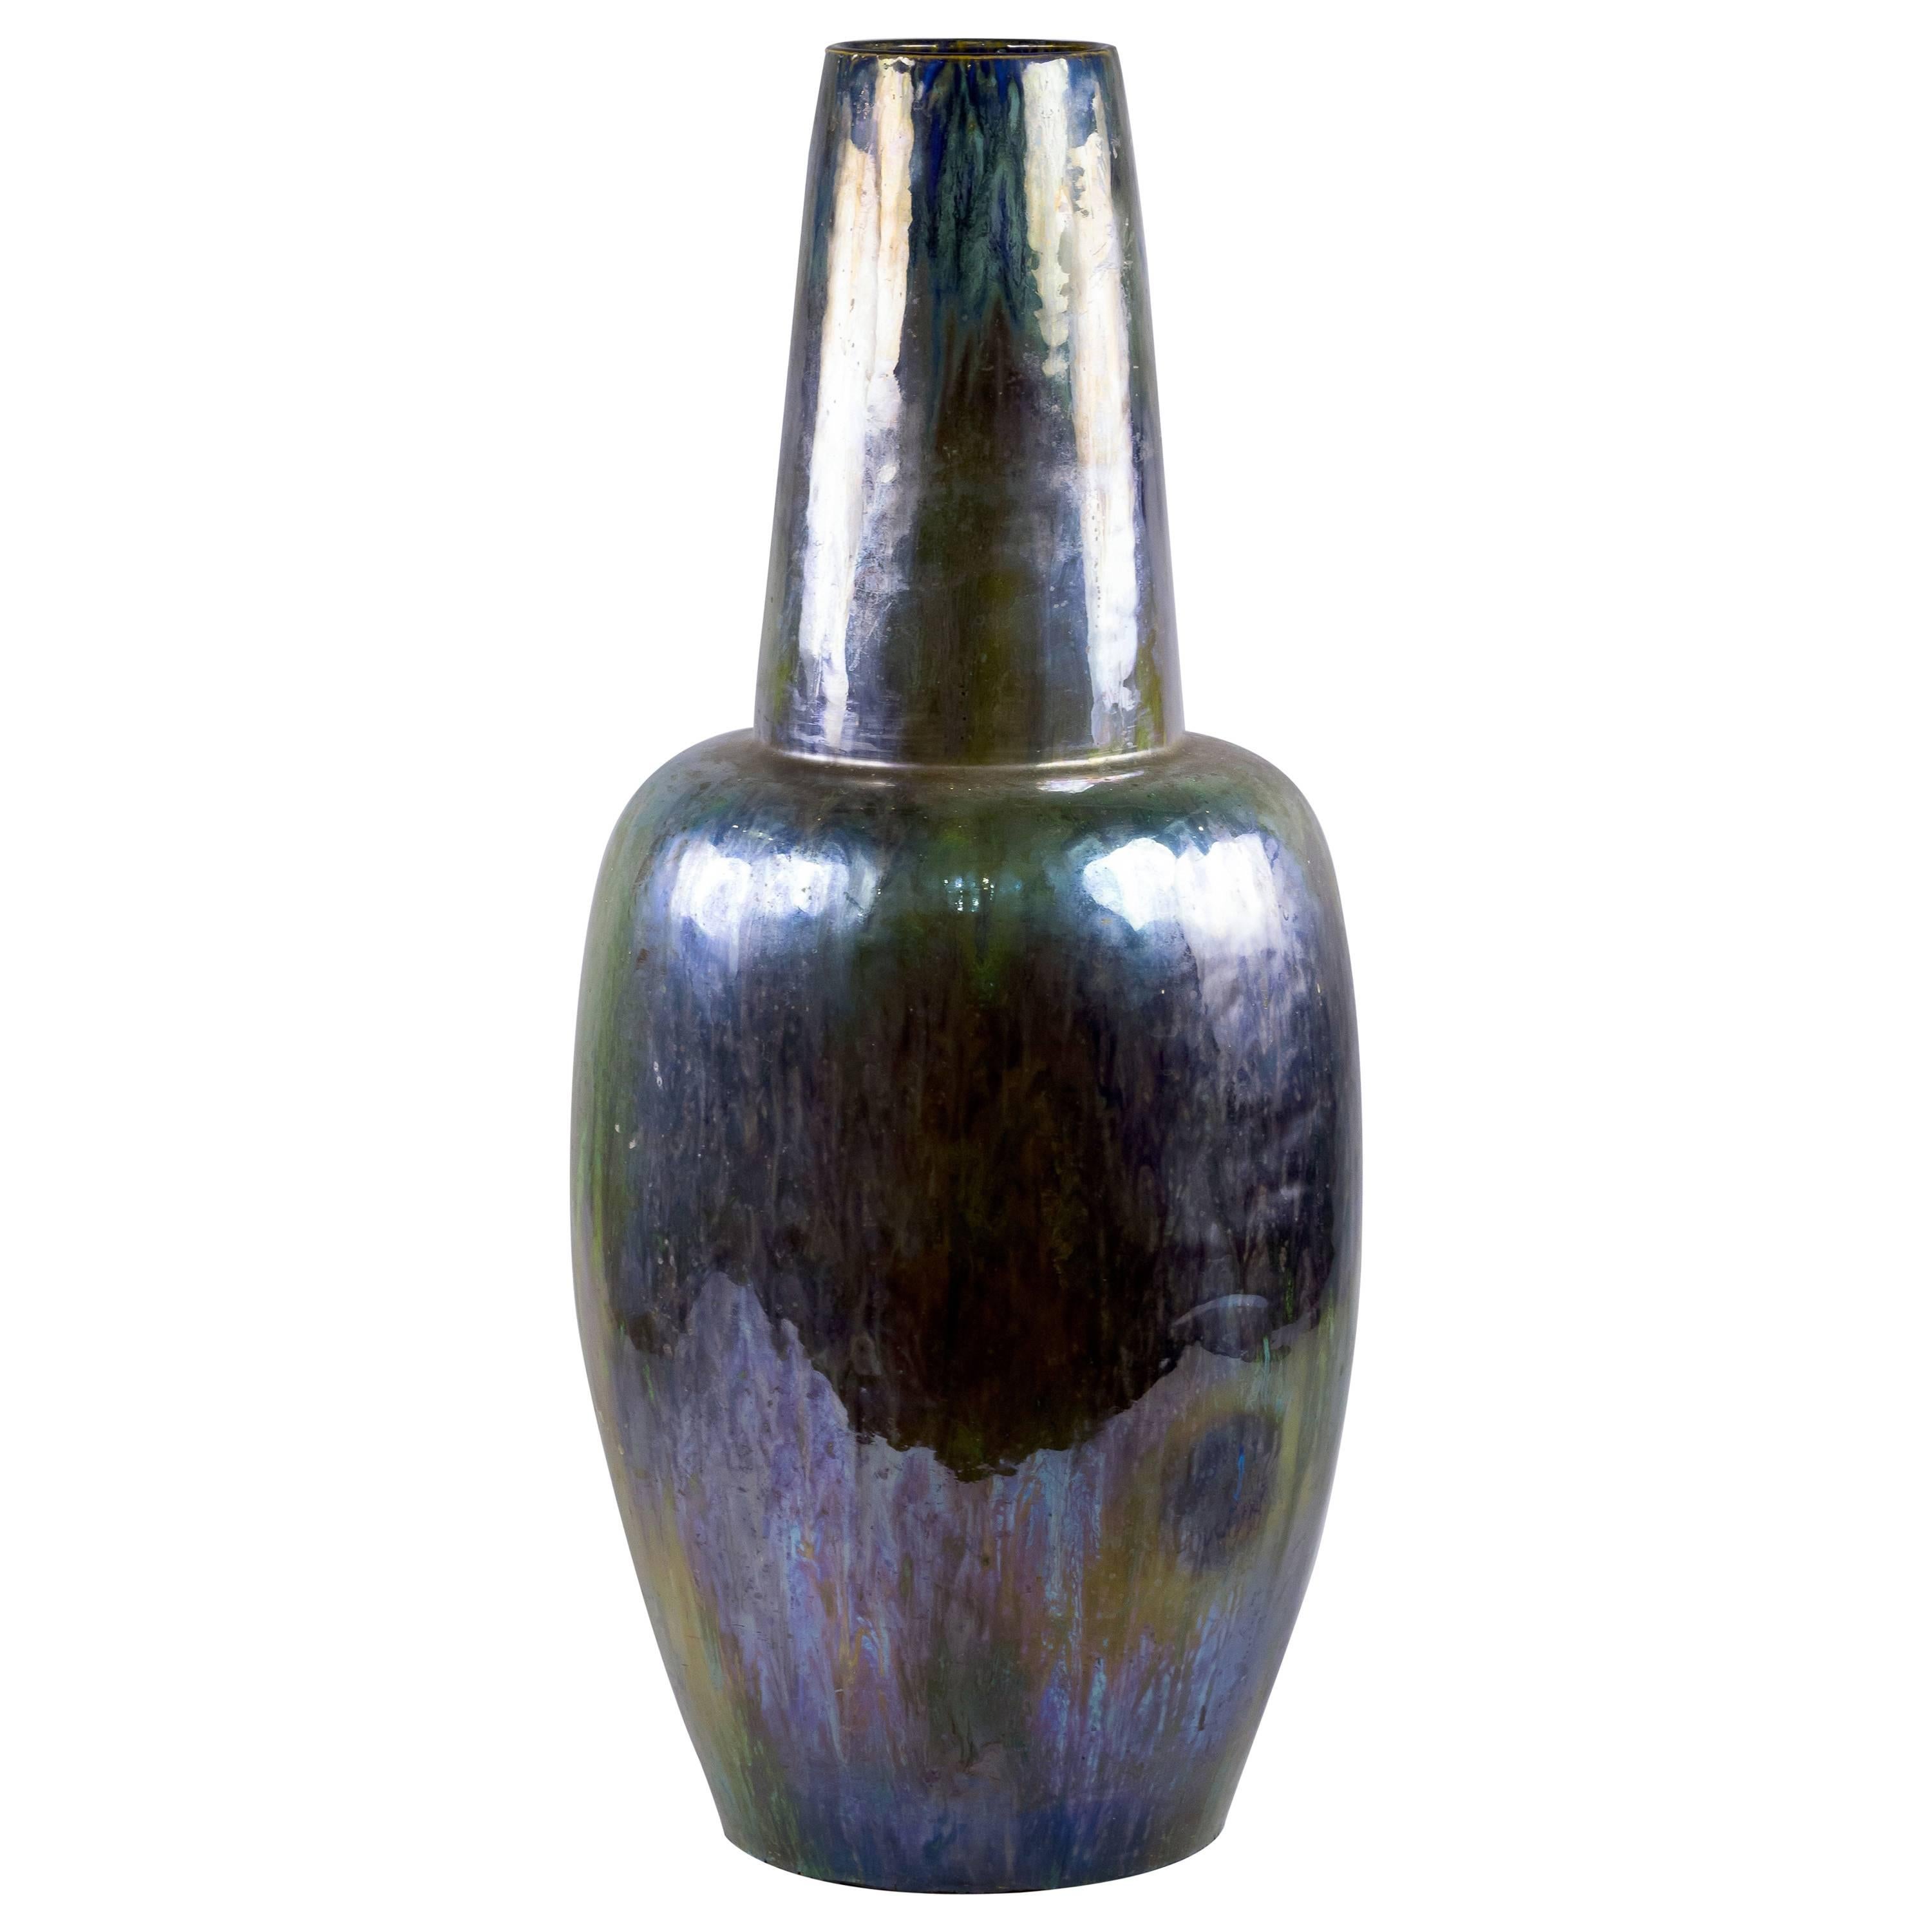 Large Art Nouveau French Pottery Iridescent Flambe Vase, circa 1900 For Sale